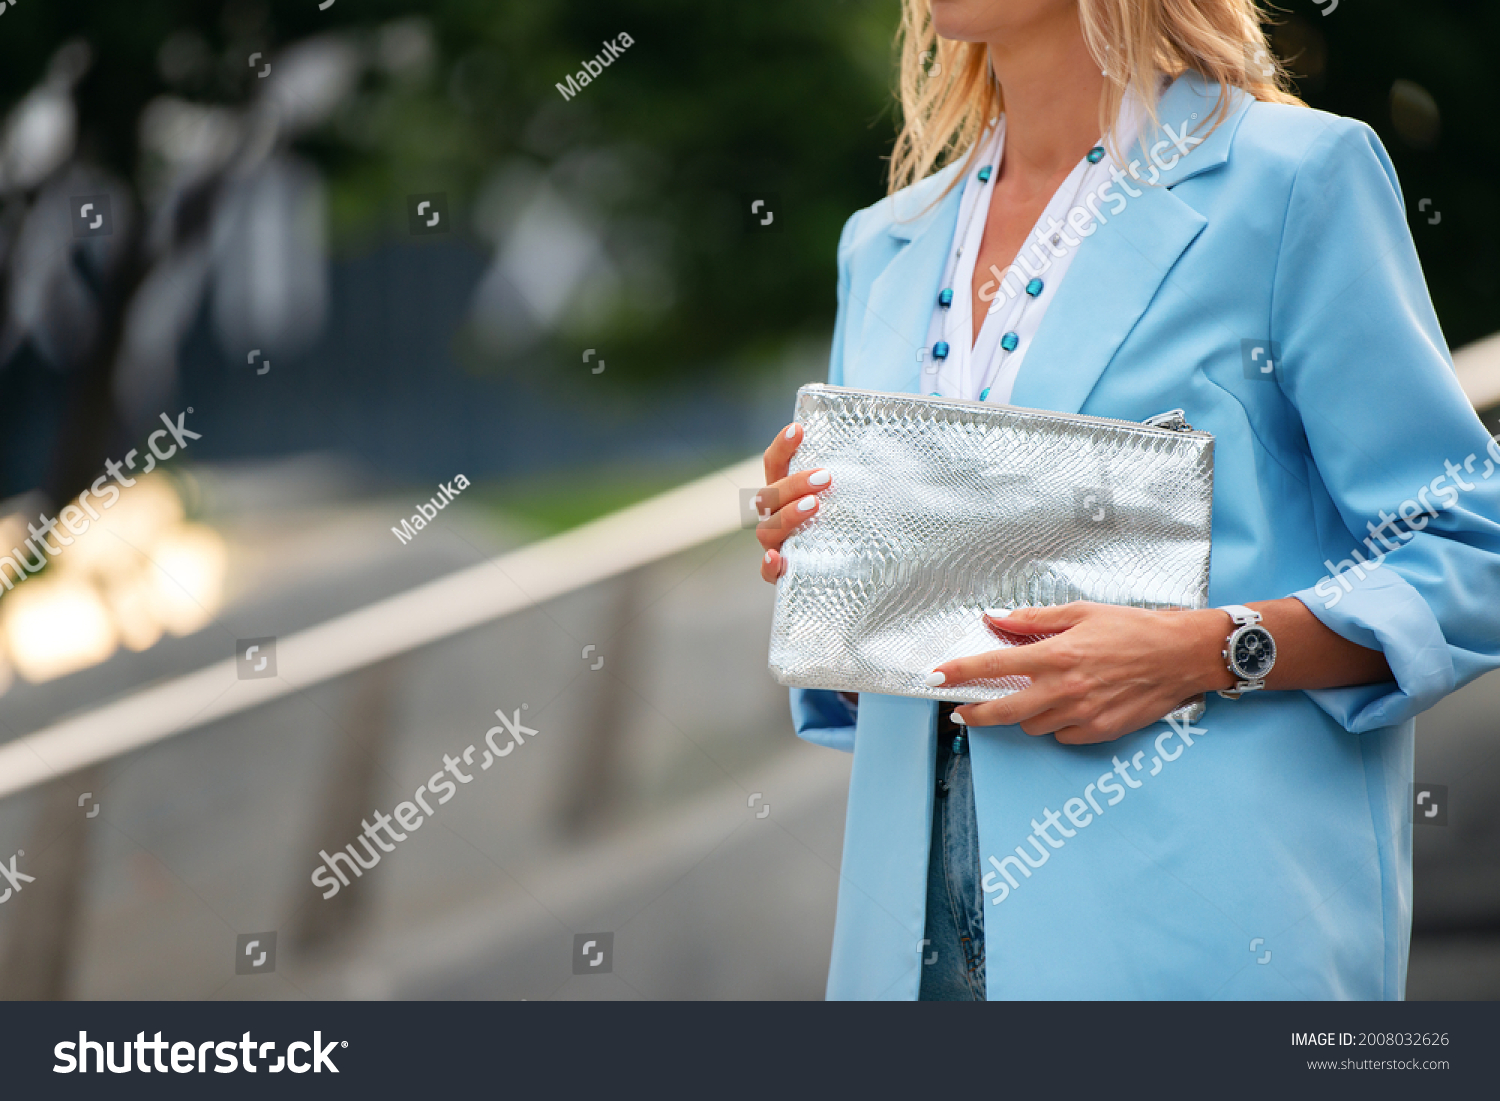 Women's silver clutch bag with snakeskin texture. Fragment of the body of a model in a summer blue jacket, white blouse. Business attire and beads. #2008032626